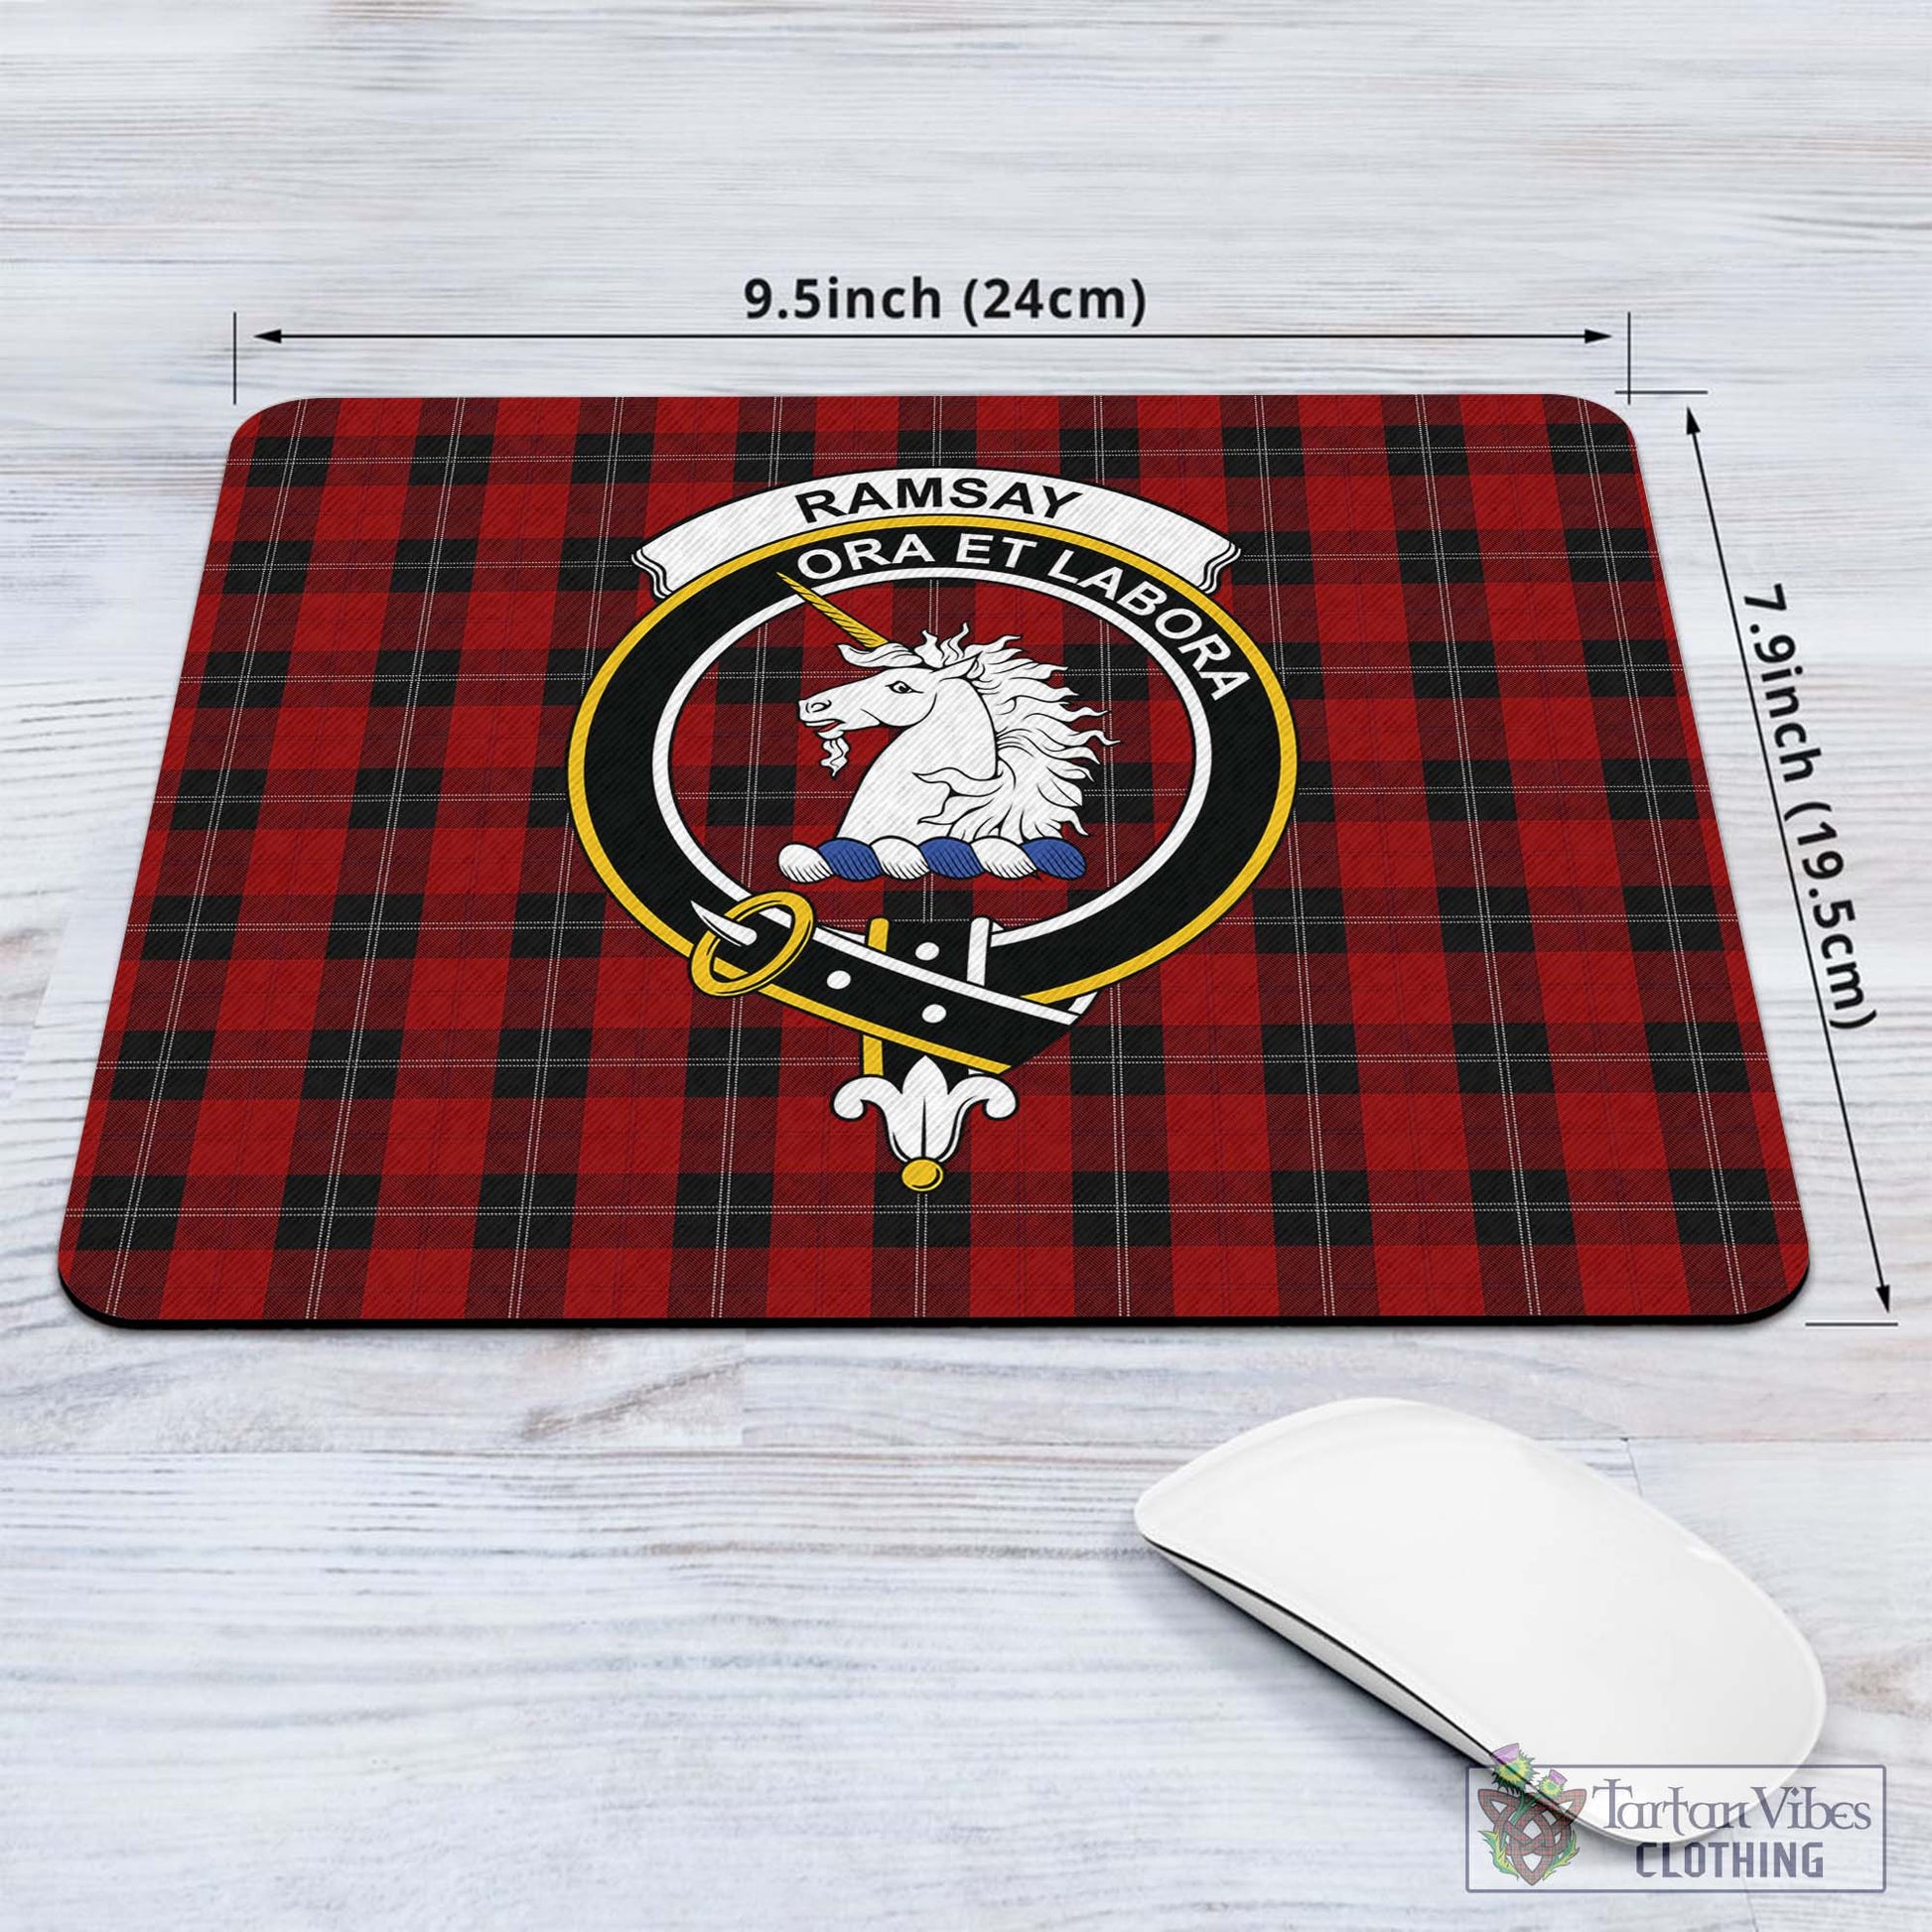 Tartan Vibes Clothing Ramsay Tartan Mouse Pad with Family Crest